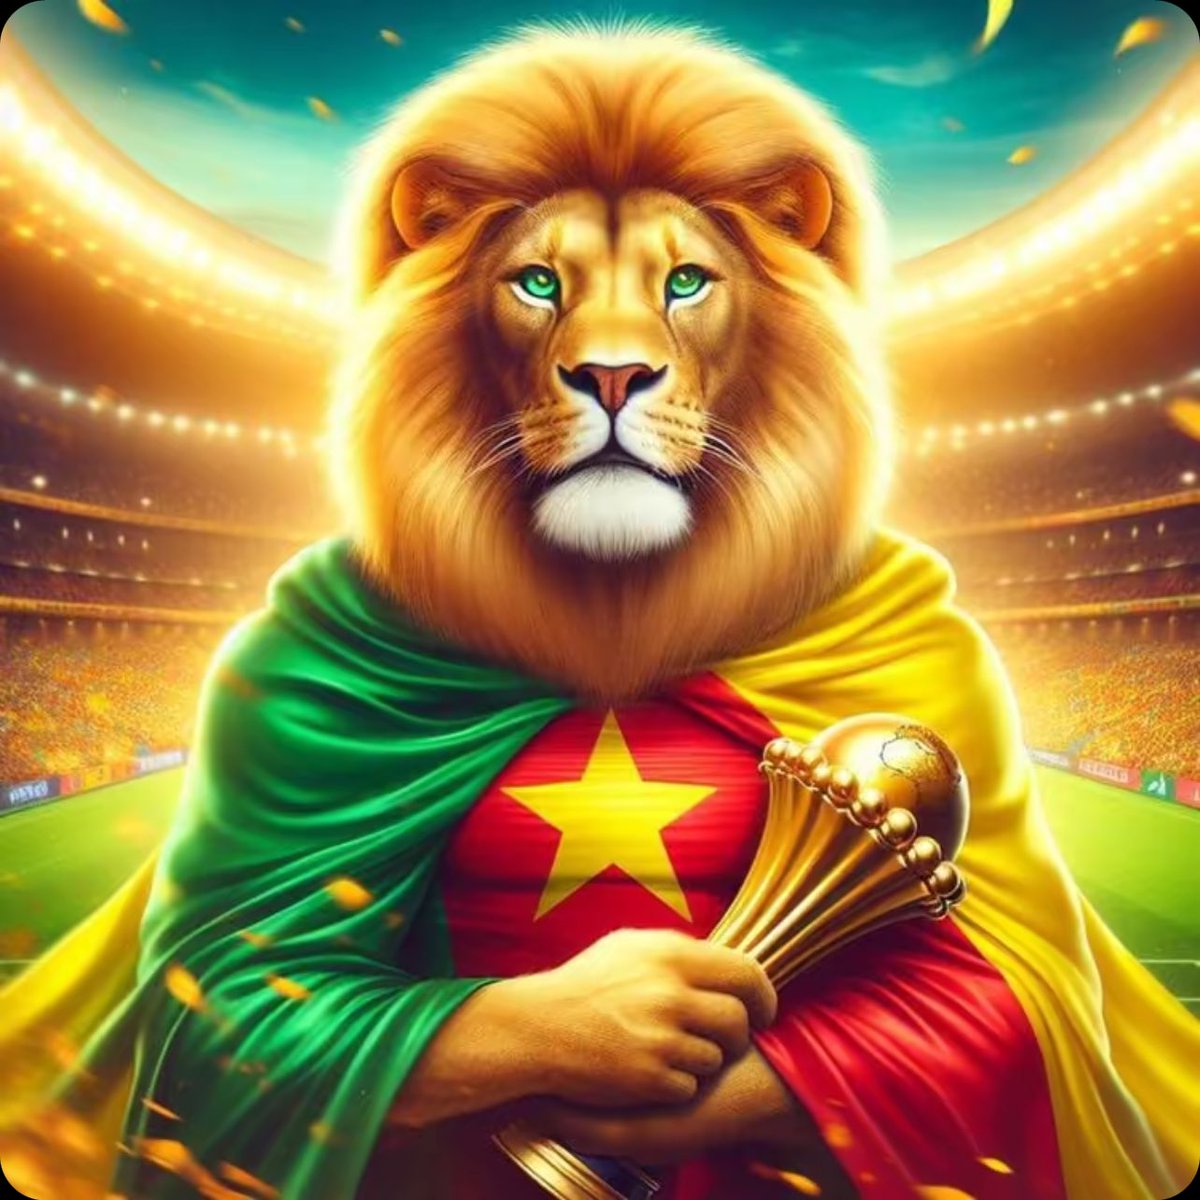 #AFCON2023 #alllezleslions #teamCameroon